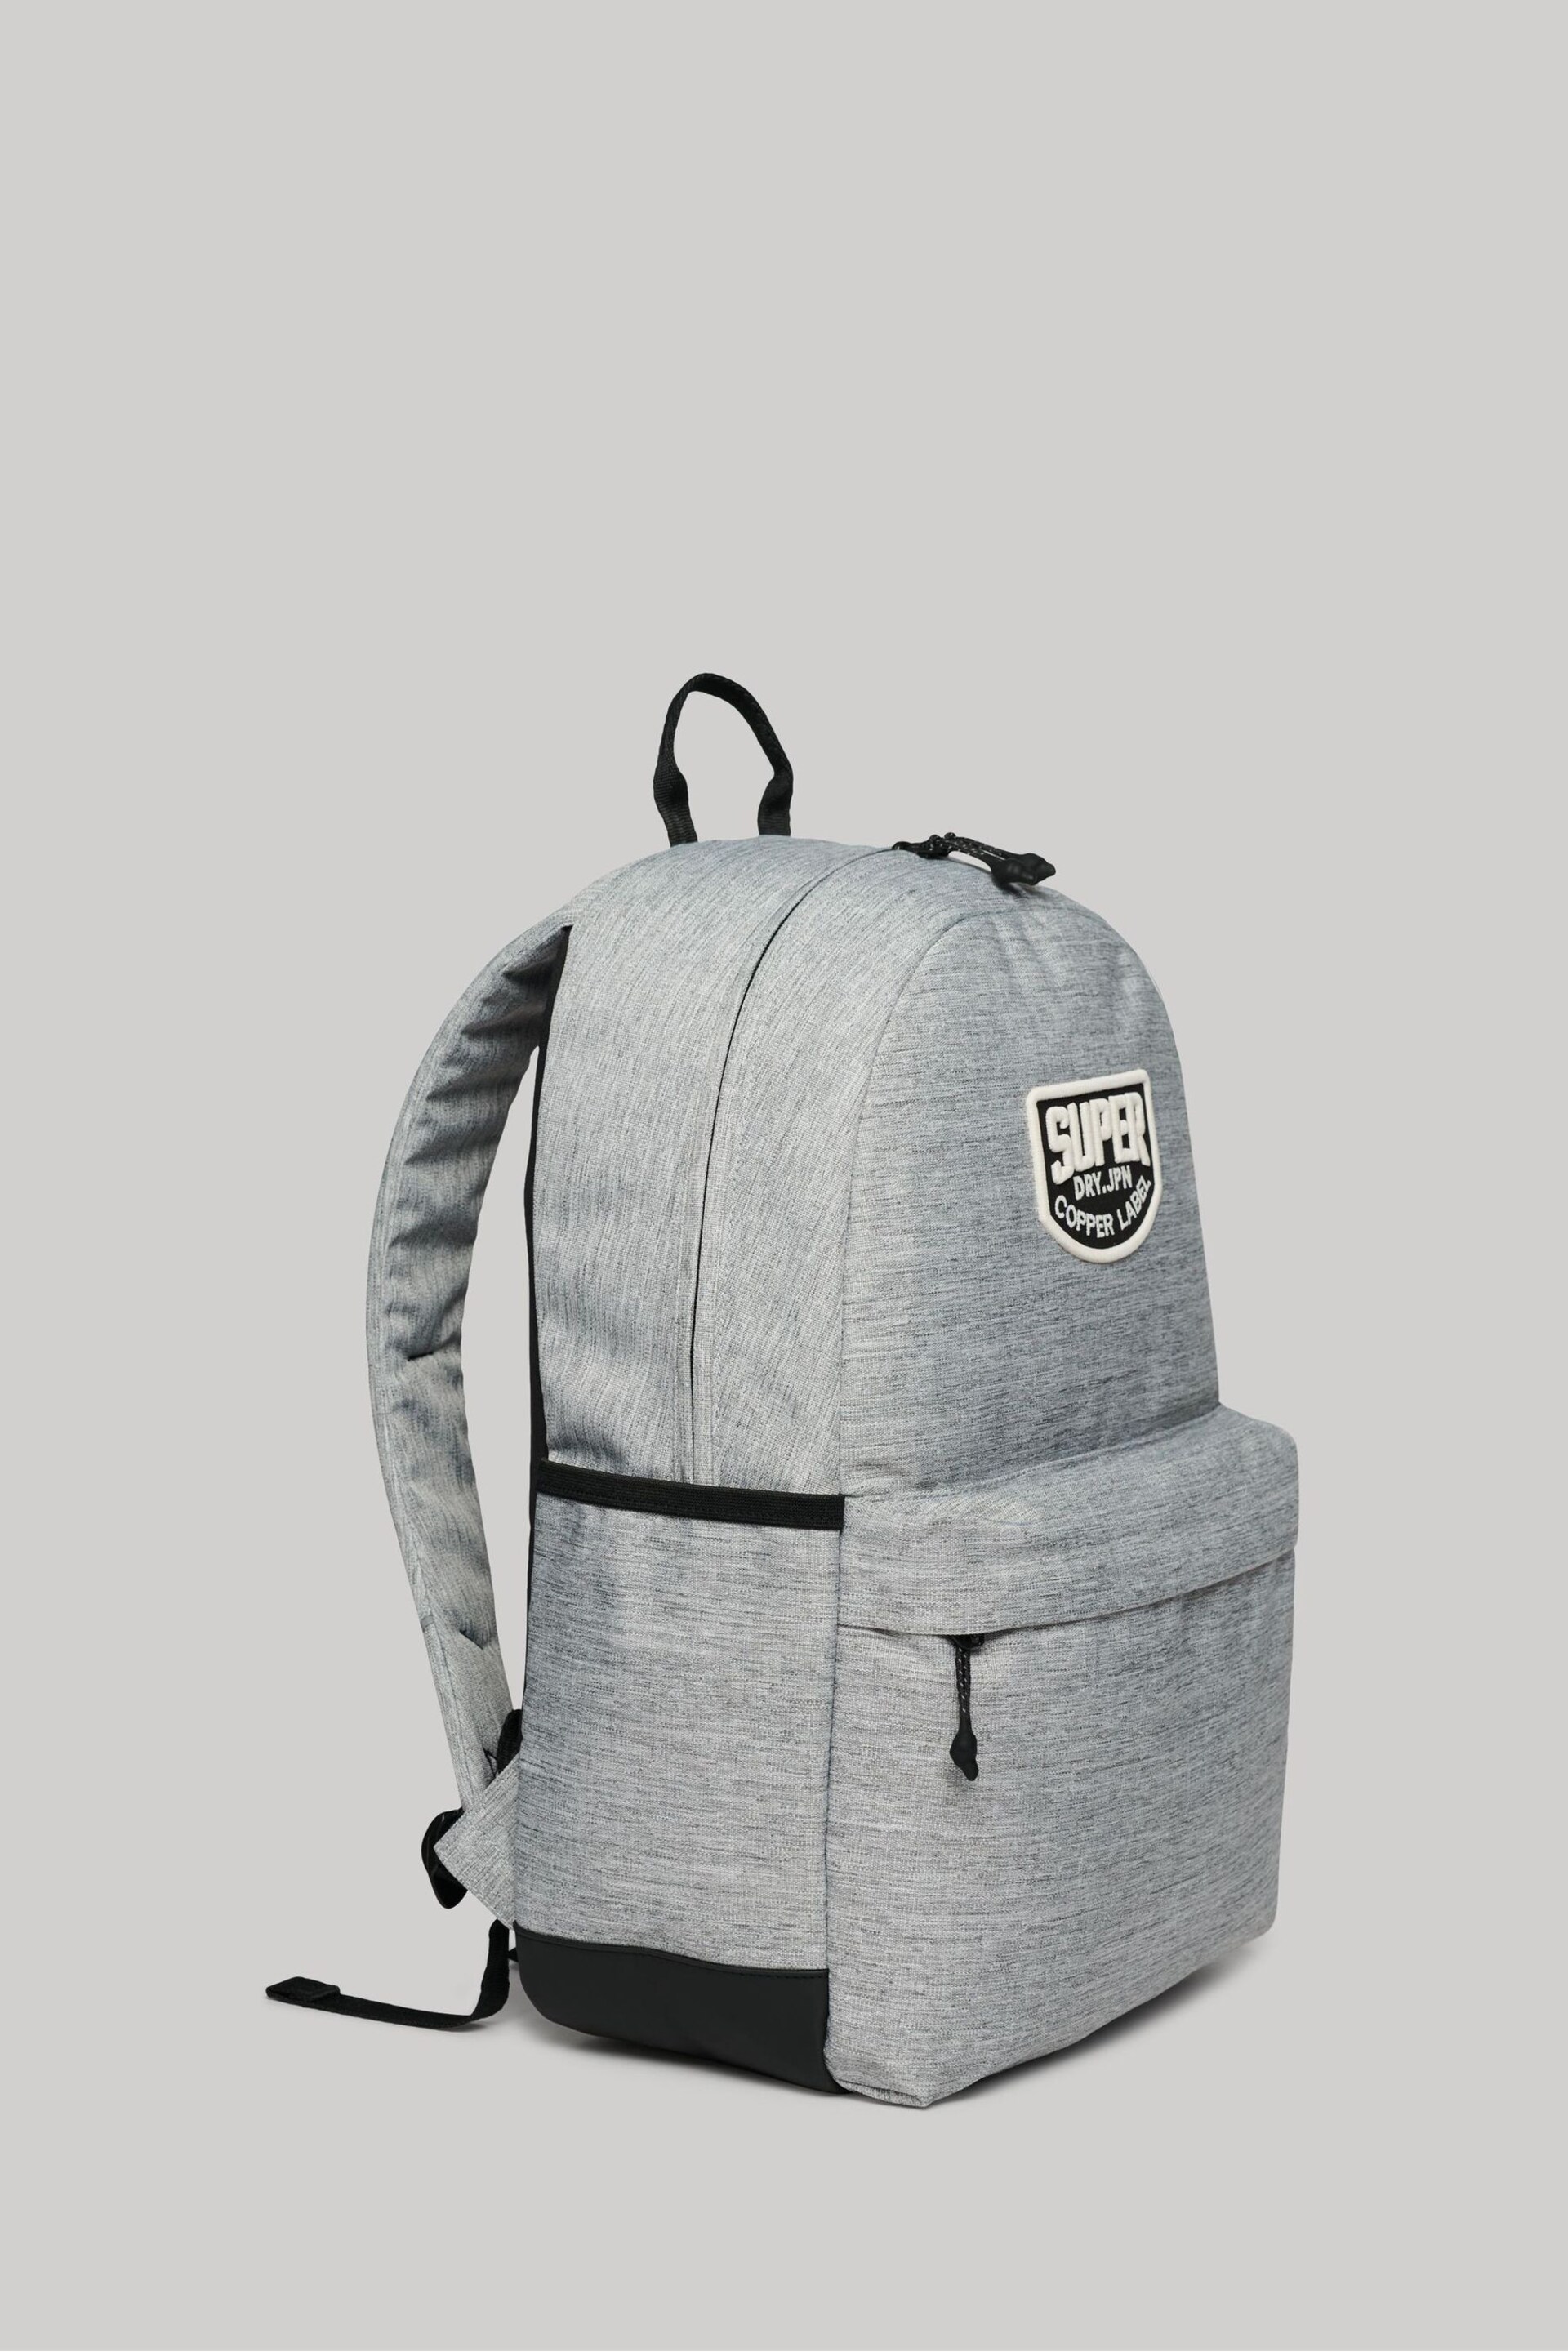 SUPERDRY Grey SUPERDRY Patched Montana Backpack - Image 3 of 6